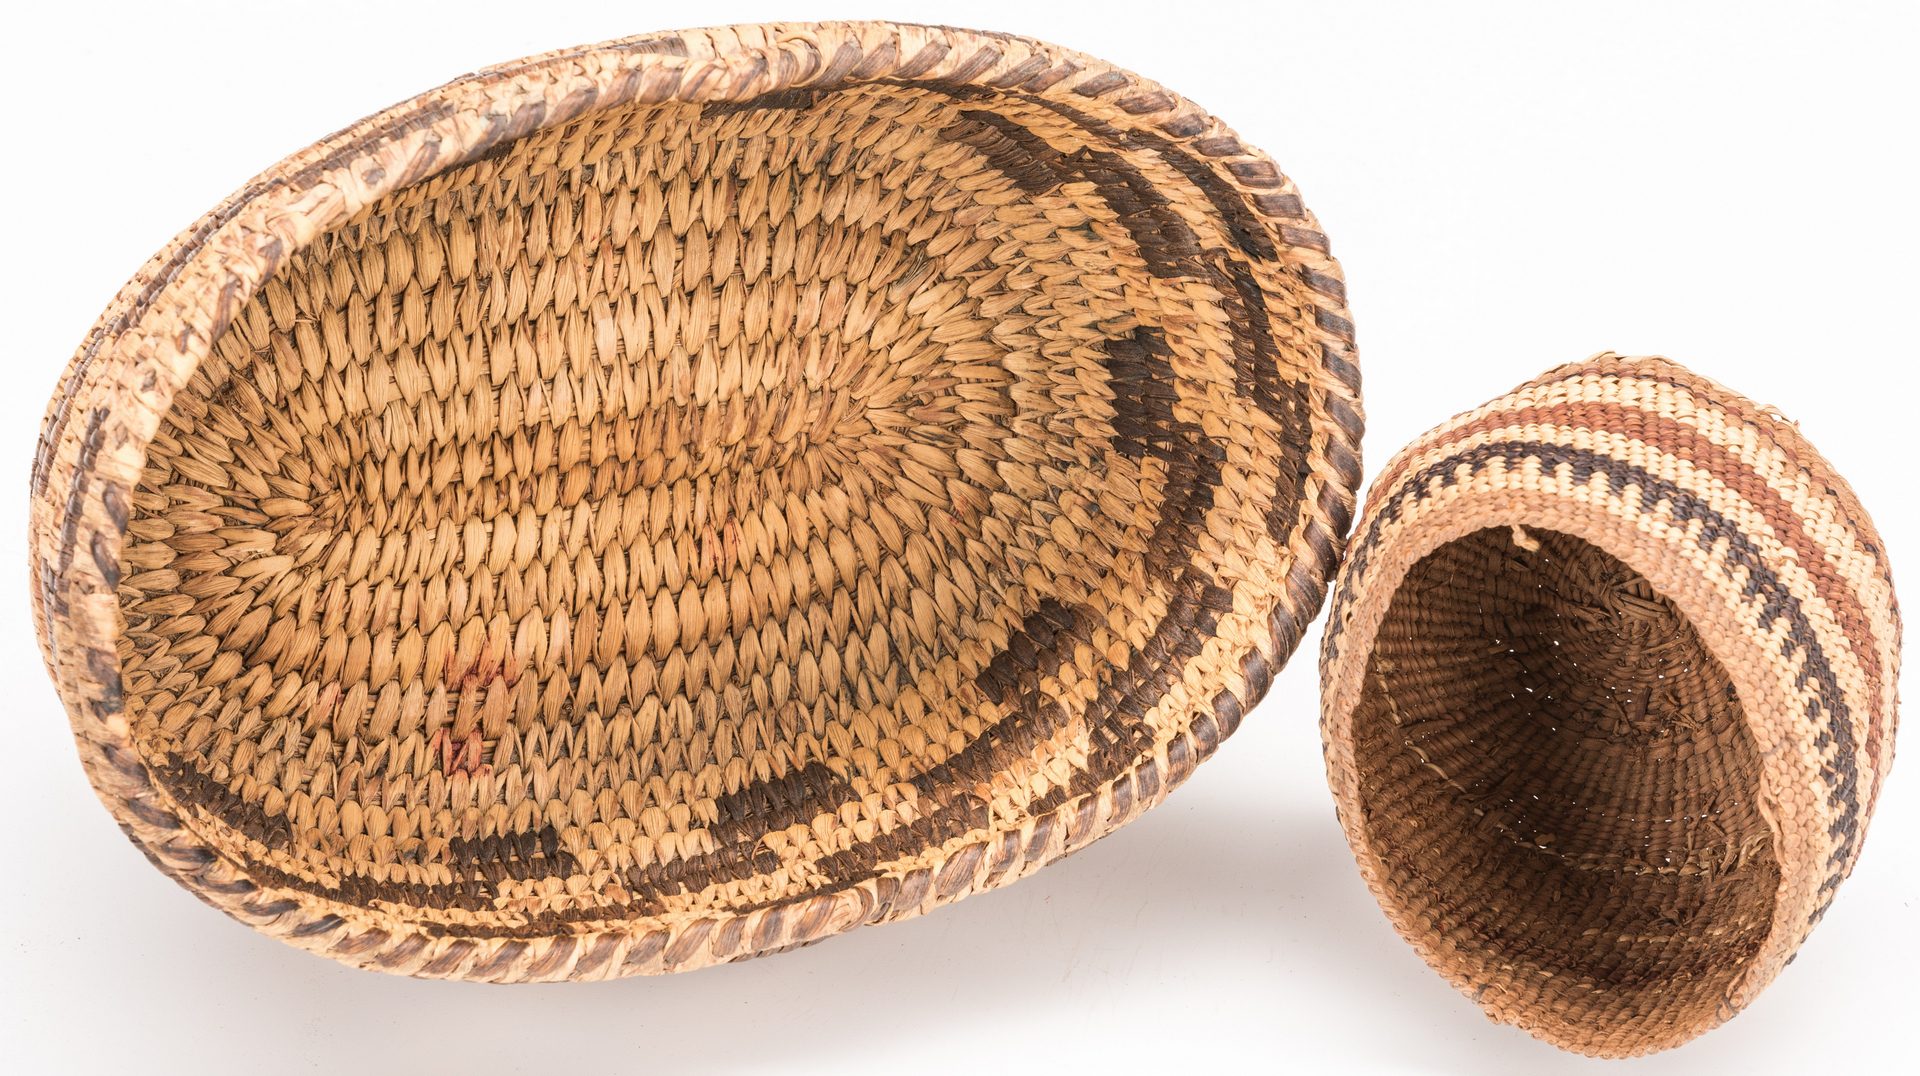 Lot 690: Group of 6 Native American Baskets